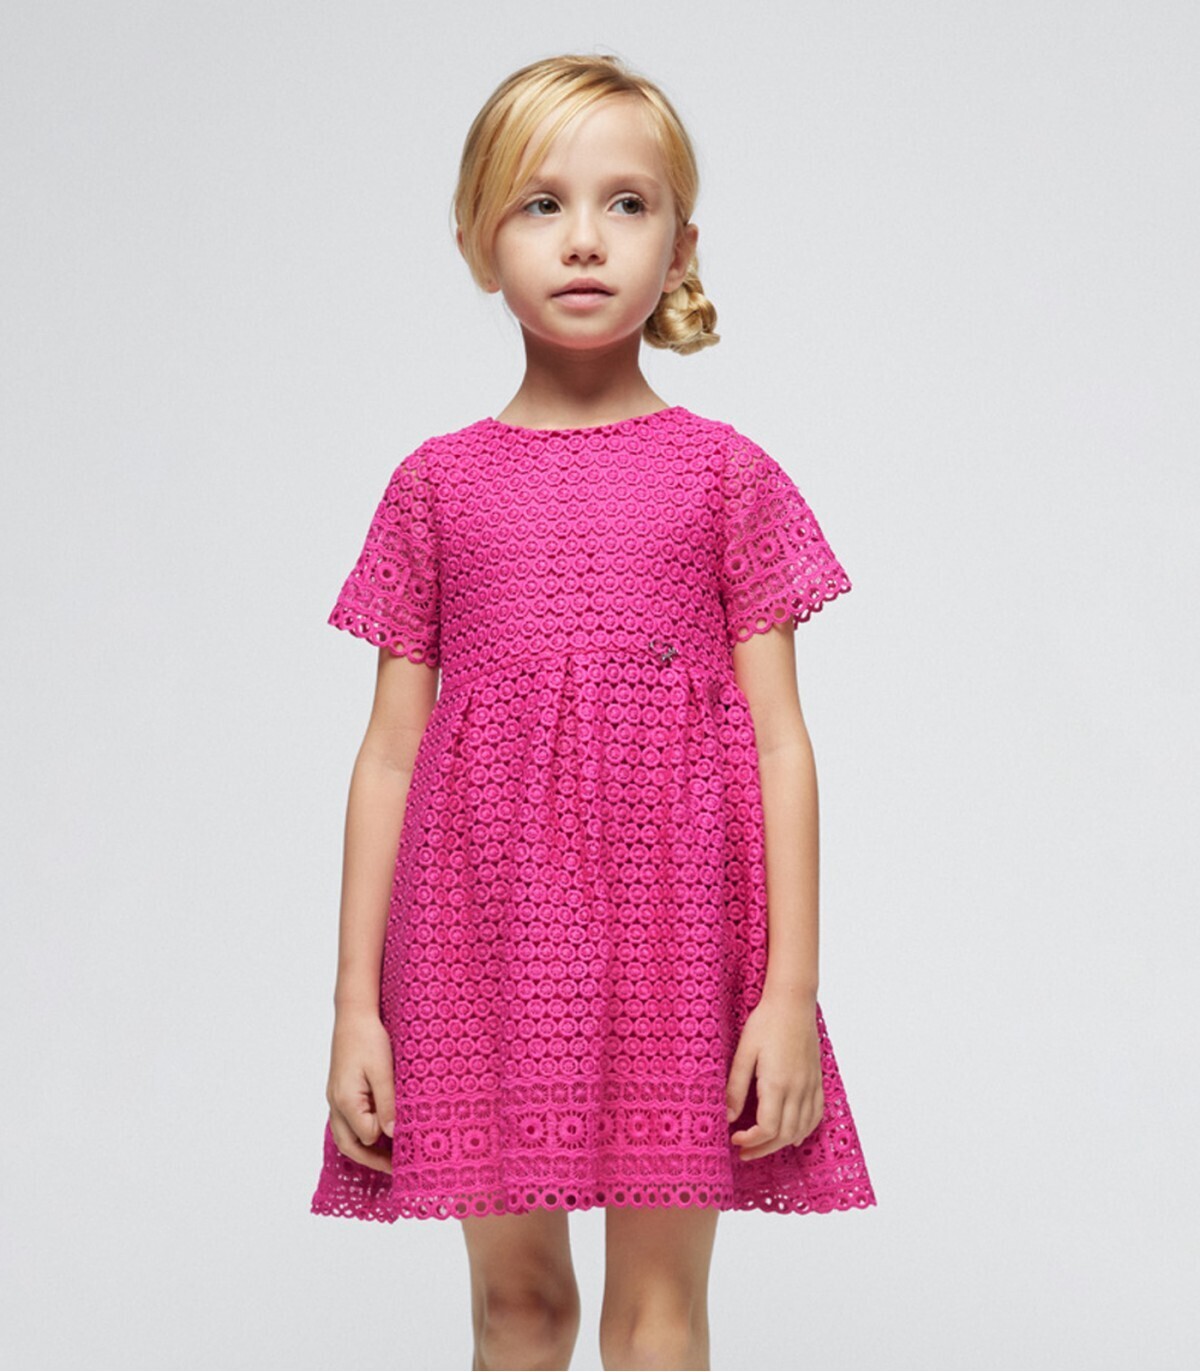 Mayoral 3918 Girl's SS Embroidered Eyelet Dress/, Color: FUCSIA, Size: 7